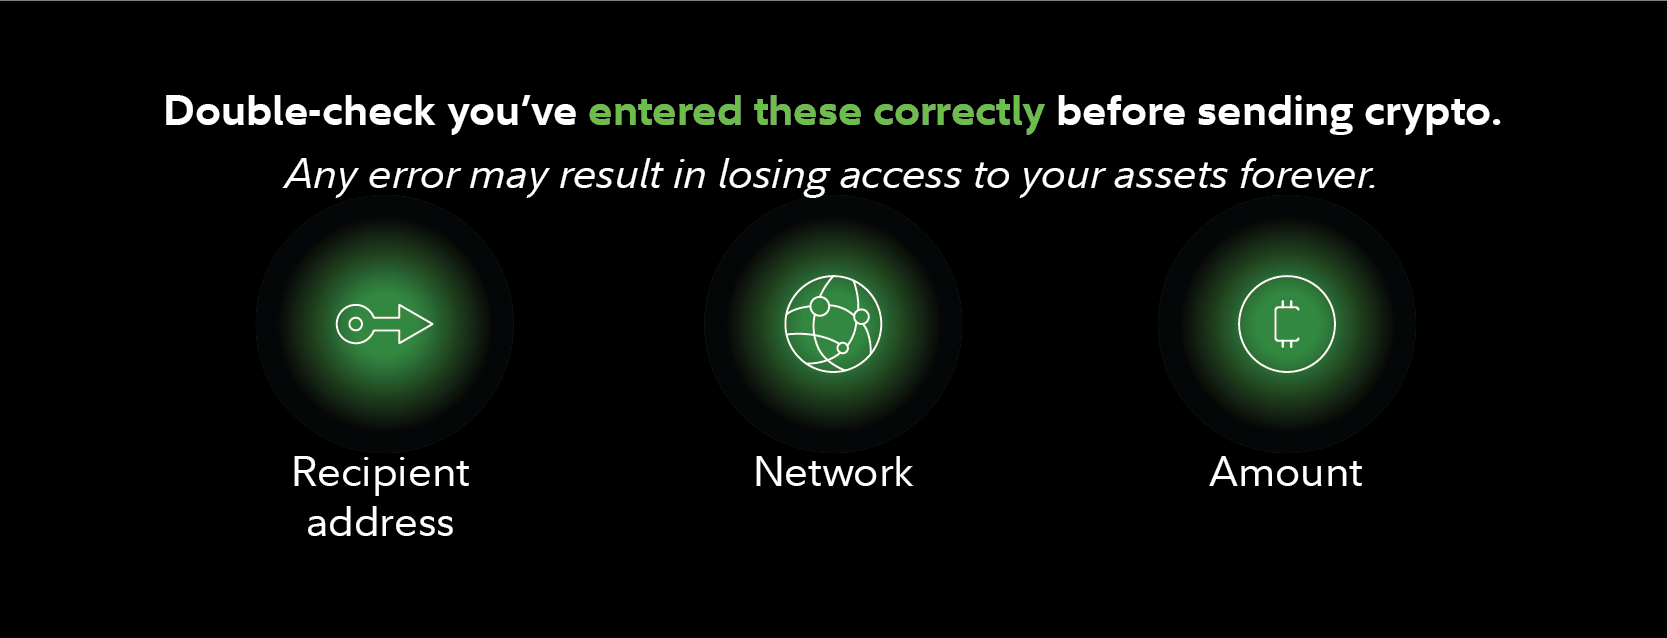 Image reminds readers to make sure they've entered the correct recipient address, network, and amount before they send crypto. Failing to do so could result in losing access to their crypto forever. 